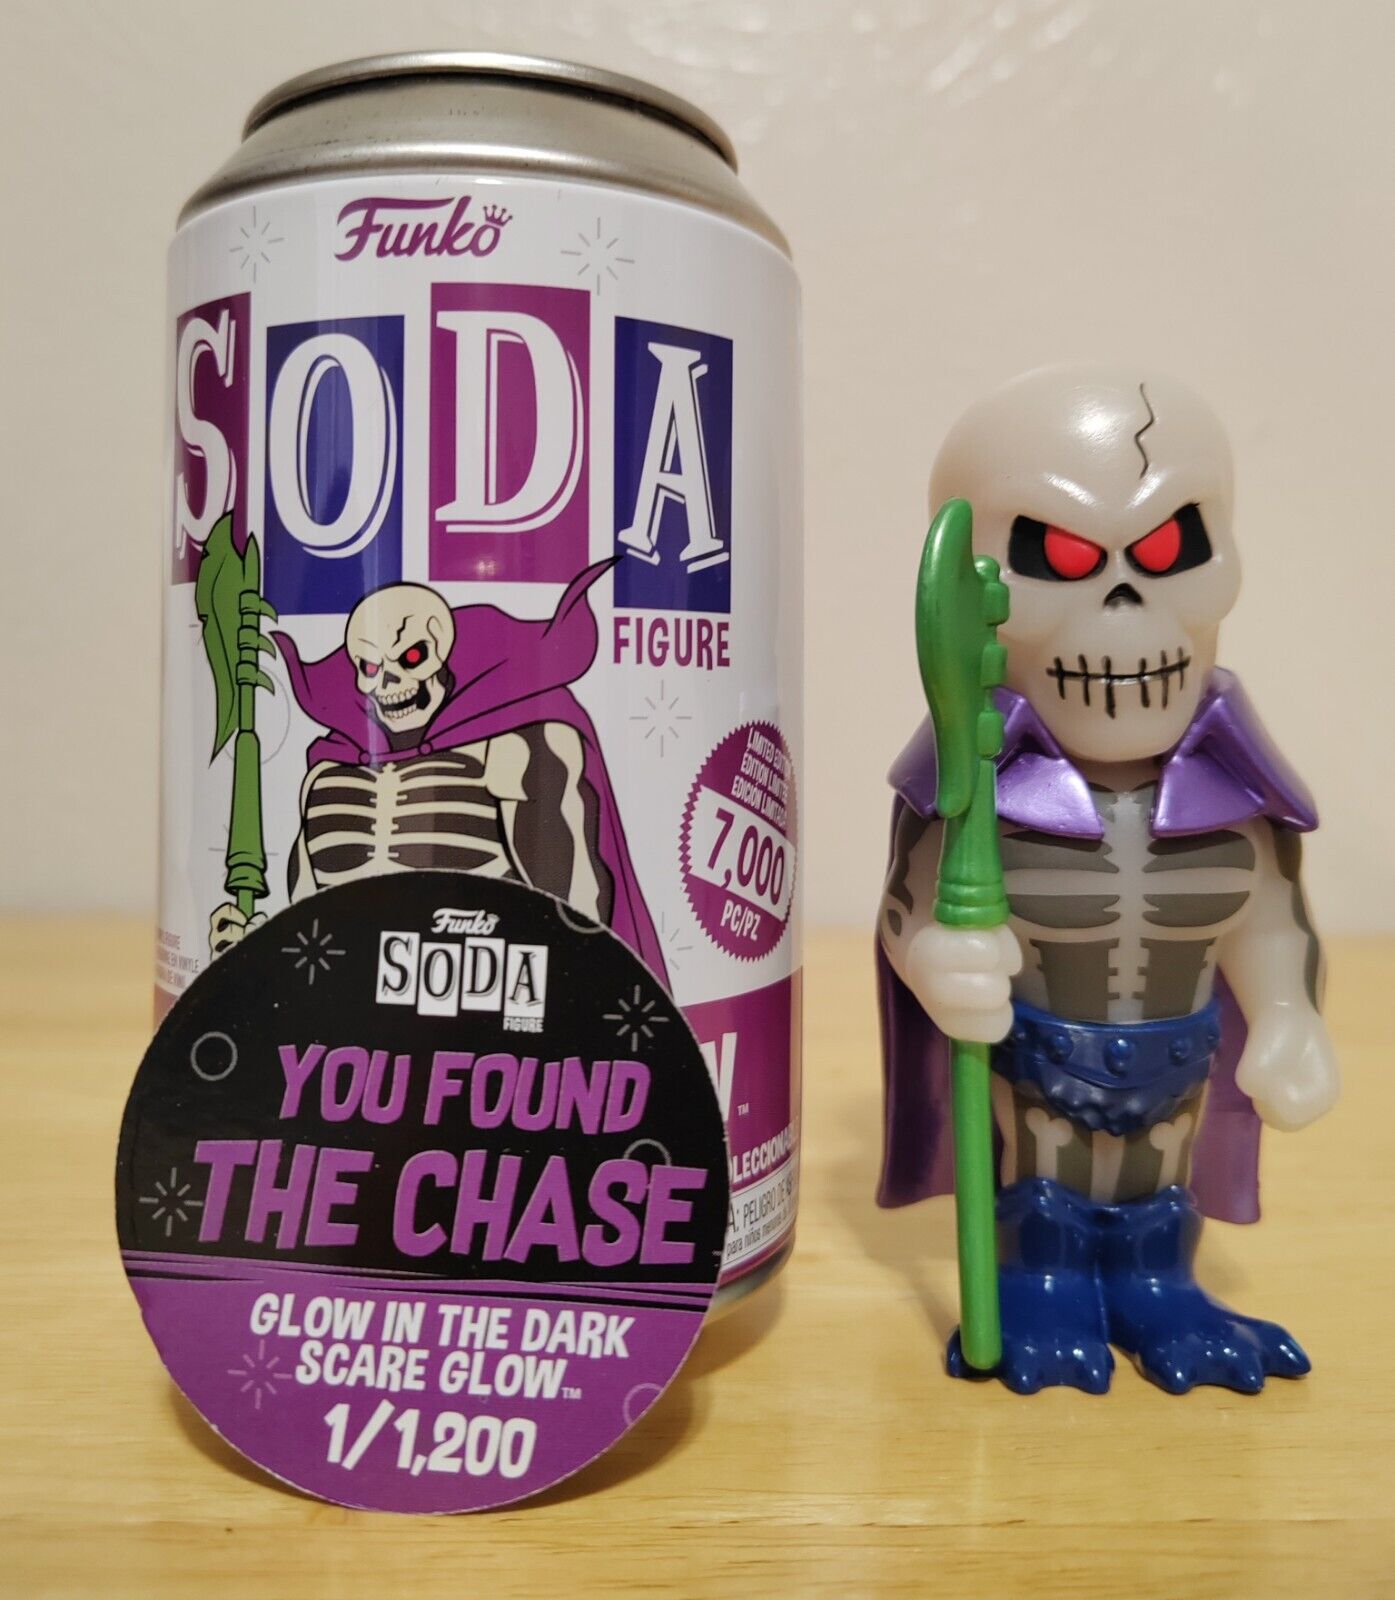 Funko Soda Scare Glow Chase (Glows in the Dark) LE 1200 Masters of the Universe